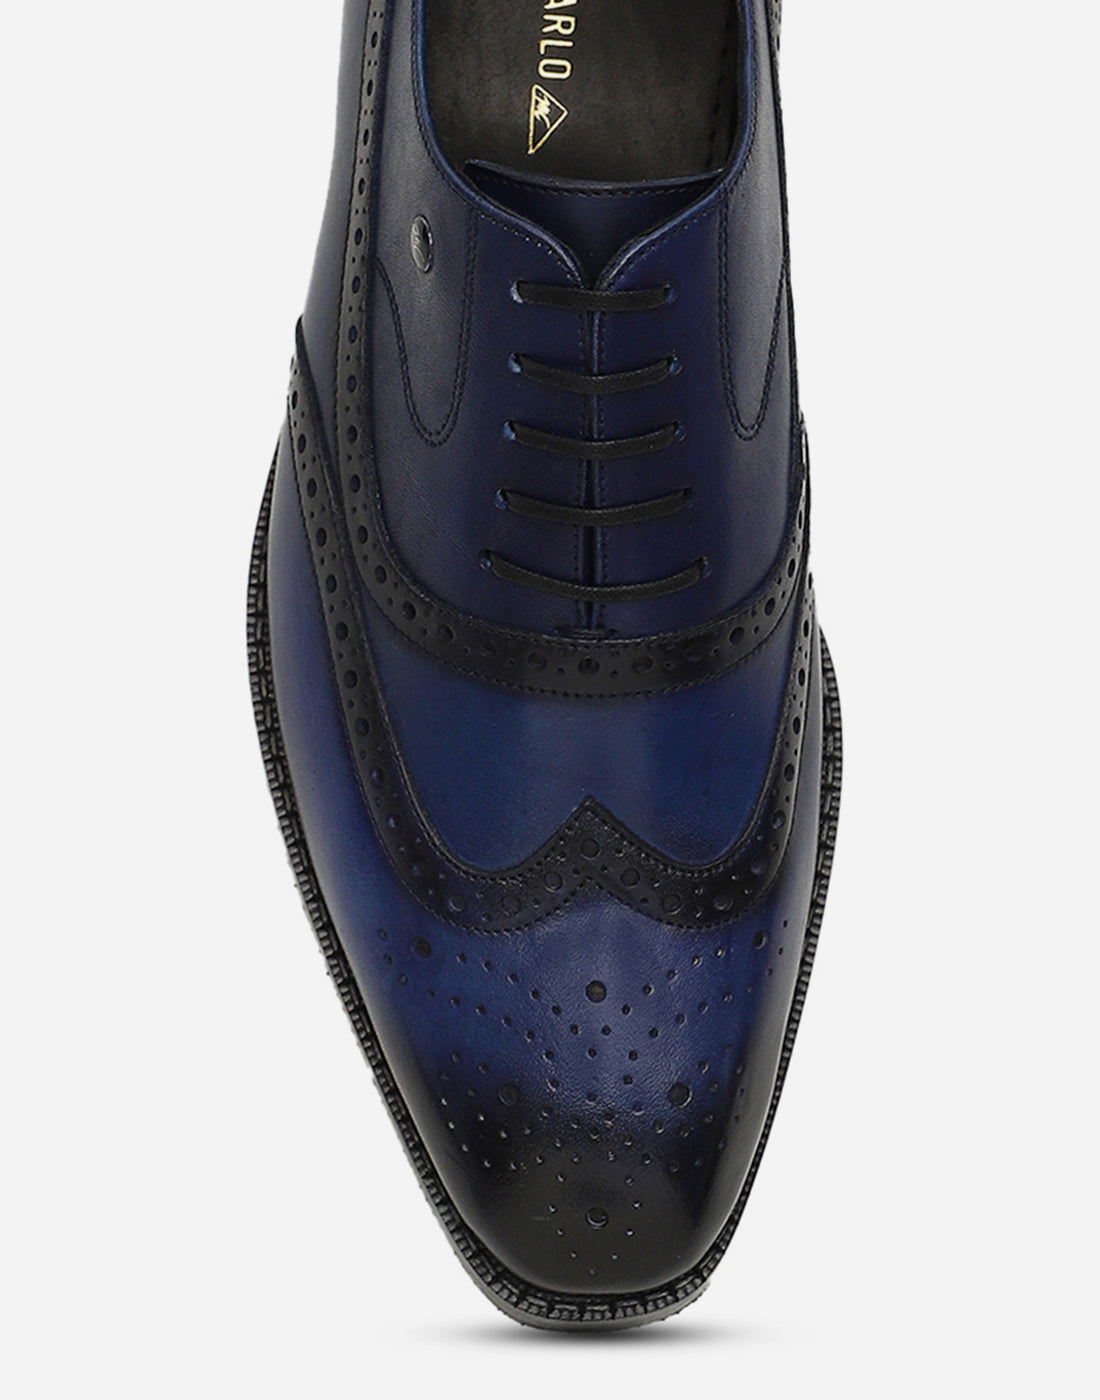 Men Navy Blue Lace Up Genuine Leather Formal Brogues